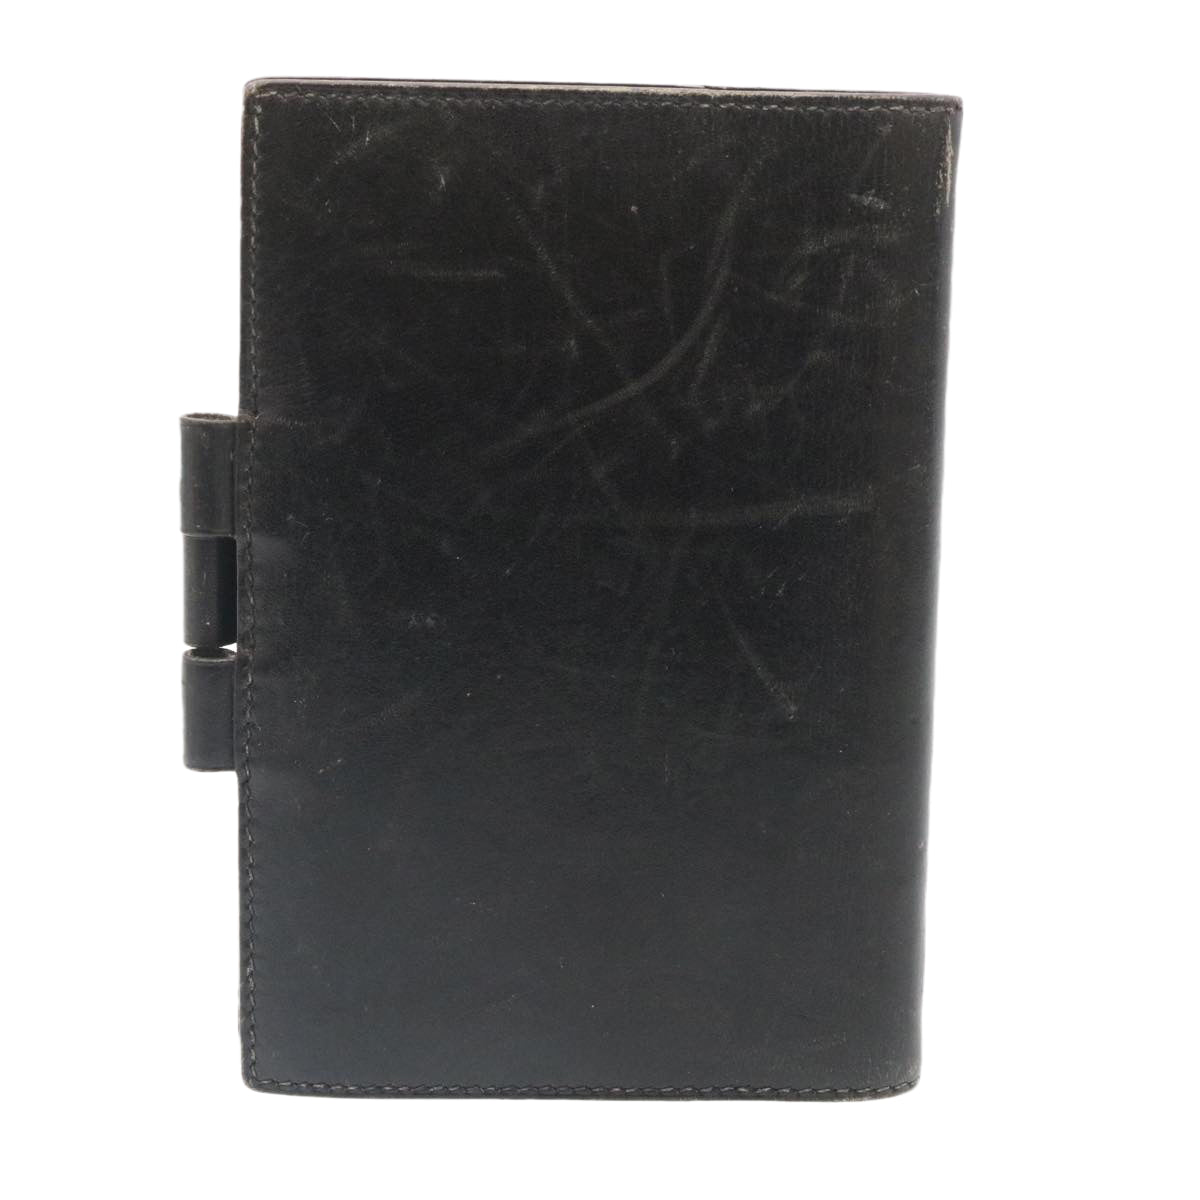 HERMES Day Planner Cover Leather Black Auth 34699 - 0